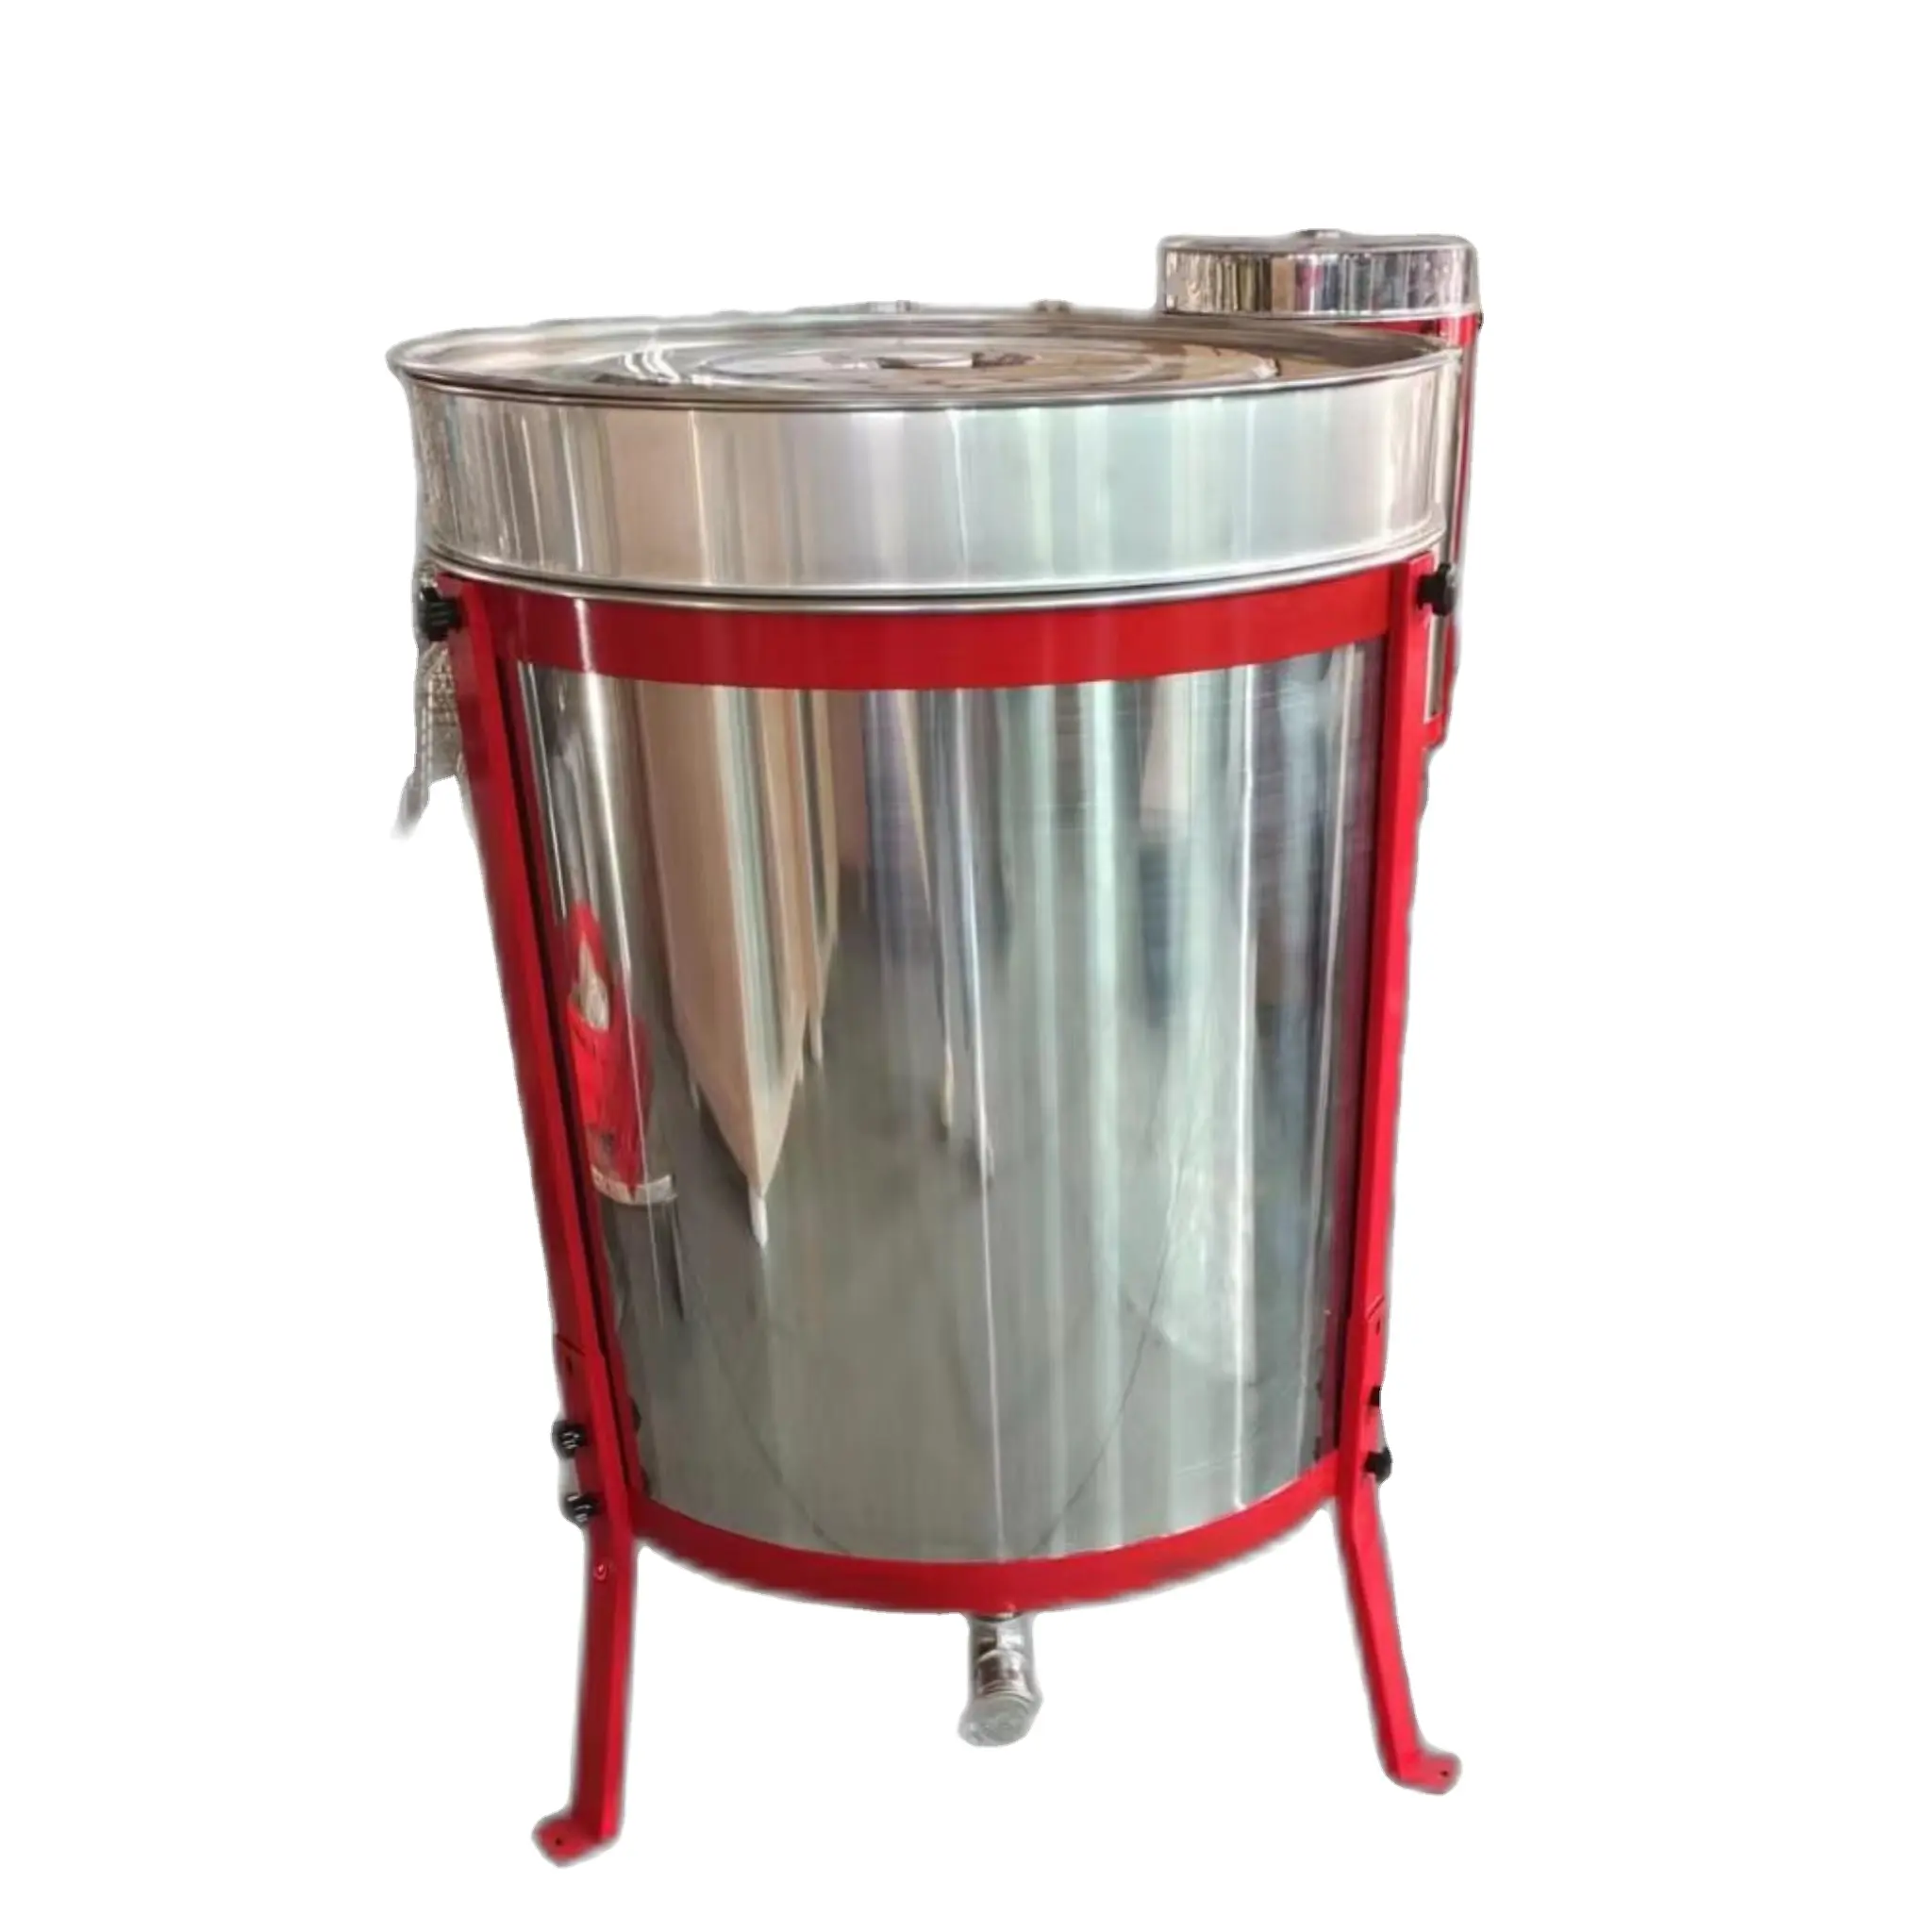 300kgs Honey storage tank Metal honey tank with filter and stands from Beestar